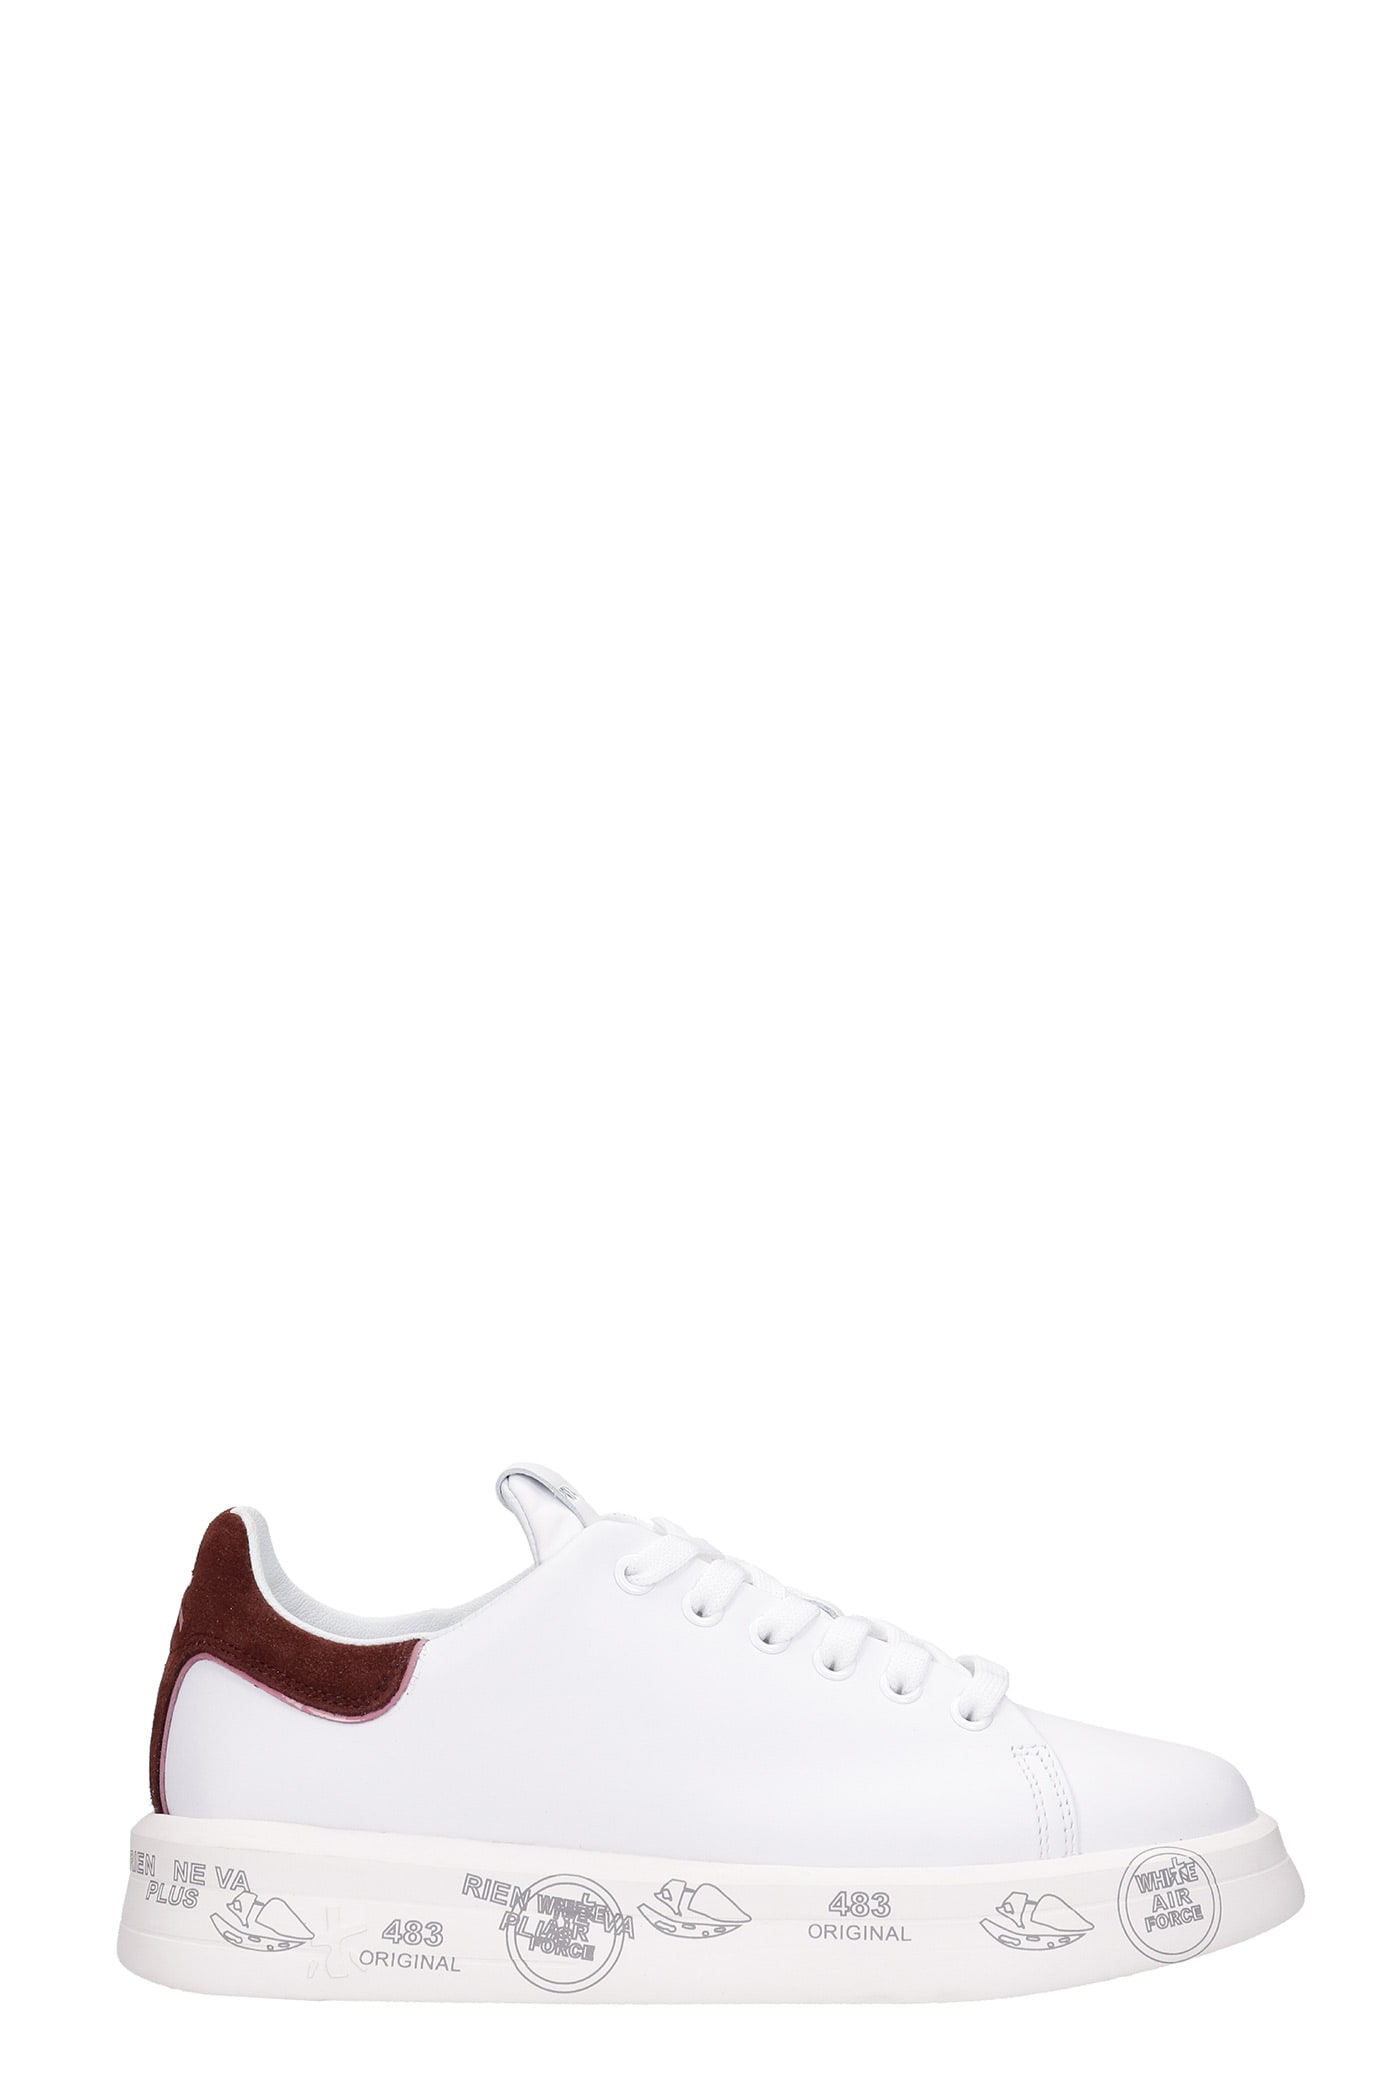 Premiata Belle Sneakers In White Suede And Leather